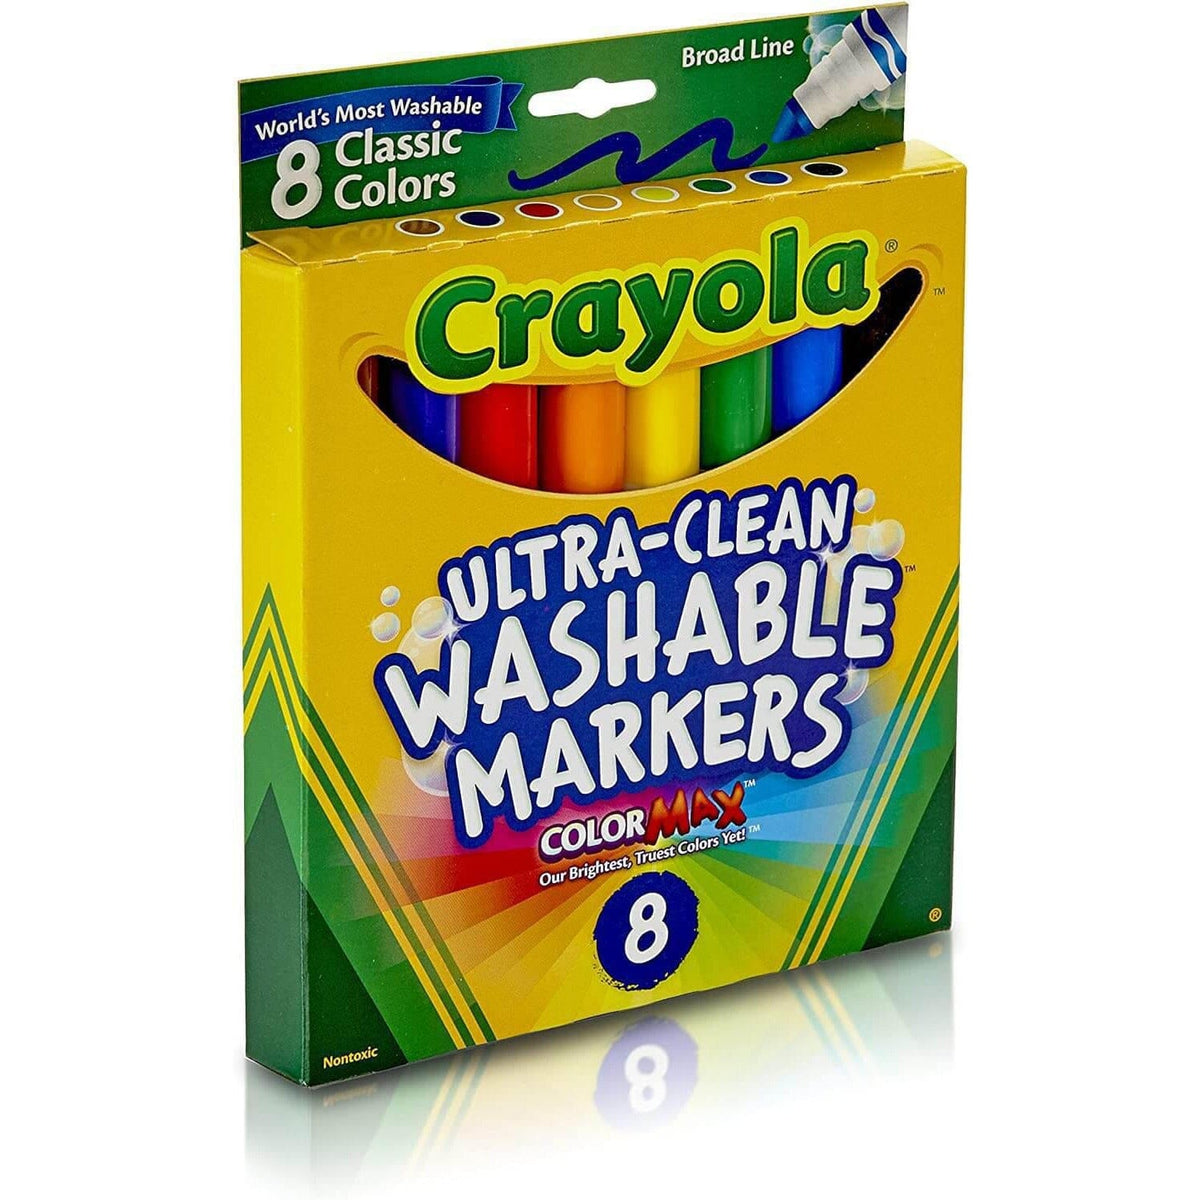 School Smart Conical Tip Washable Art Markers, Black - Pack of 12